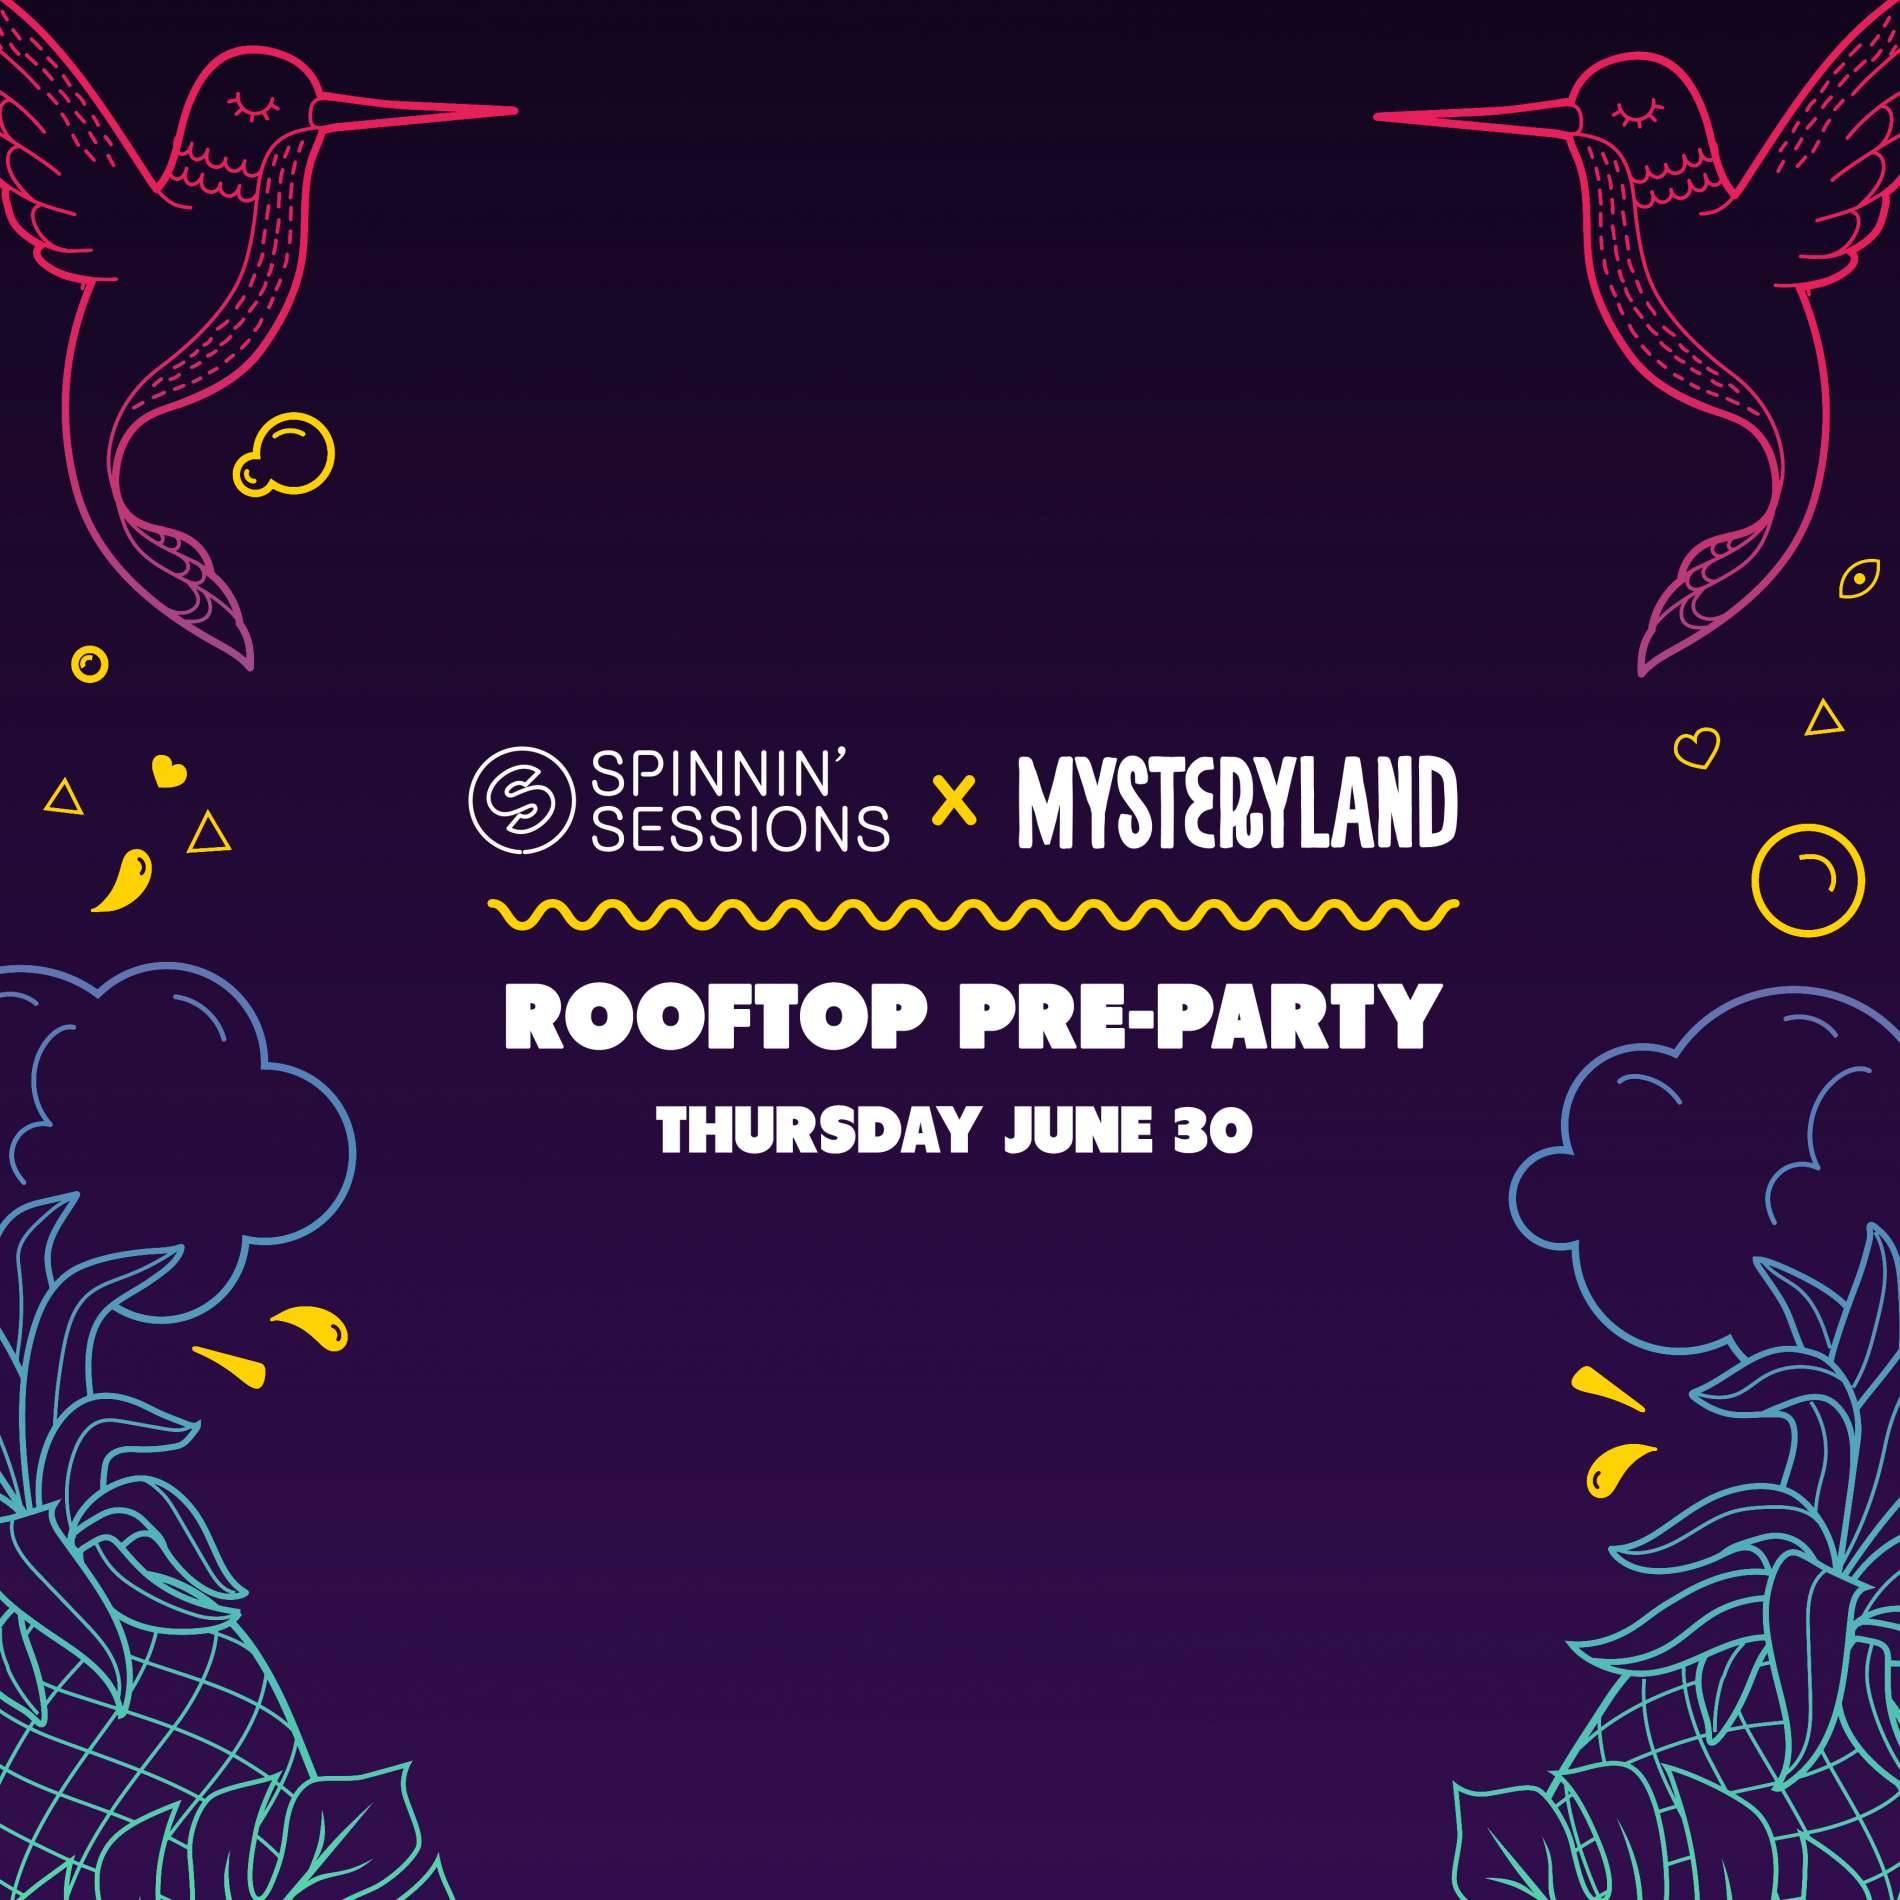 Watch Spinnin's Mysteryland pre-party!